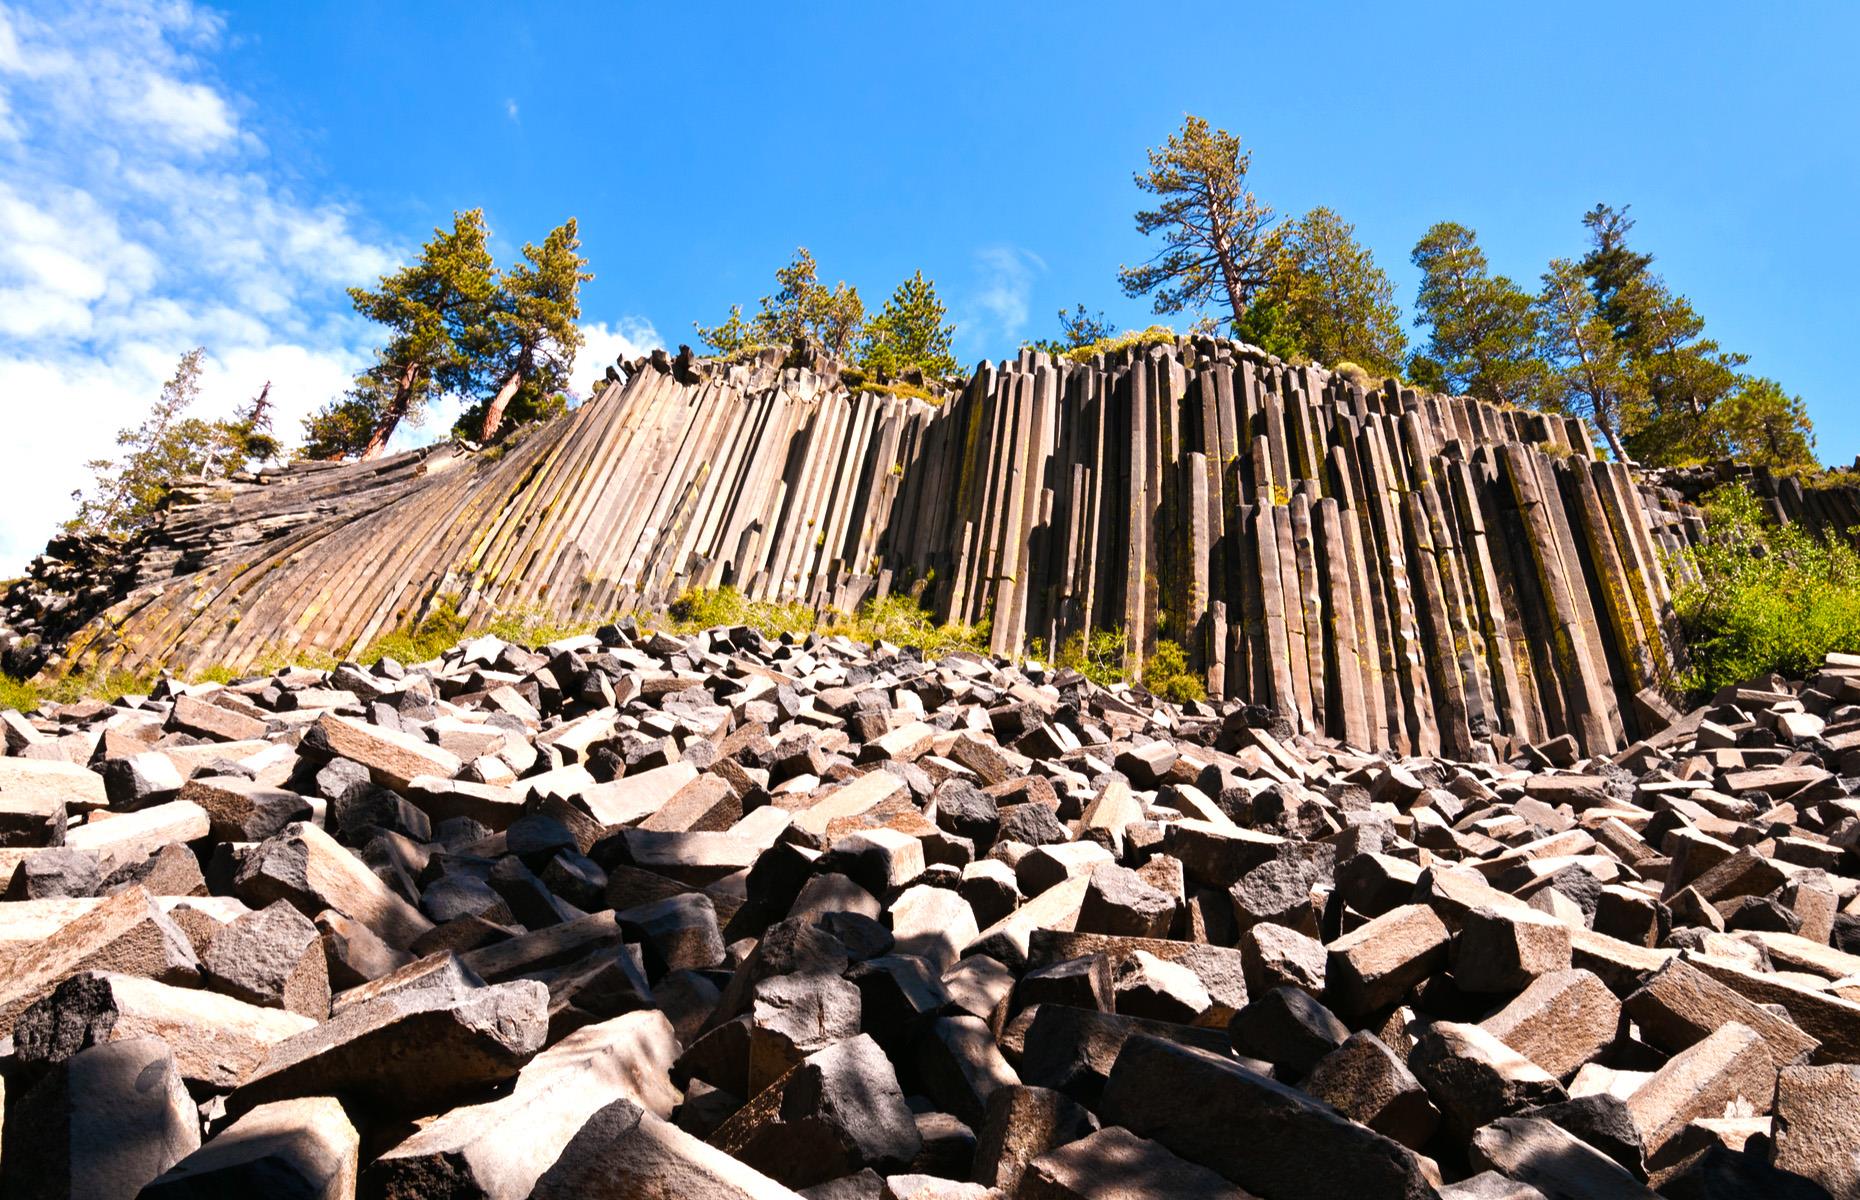 <p>This National Monument is one of the finest geological wonders in California – and that’s no small feat in a state home to the great granite bulks of Yosemite National Park. Formed many thousands of years ago by cooling lava and bearing some resemblance to Wyoming’s Devils Tower, the Devils Postpile is a giant columnar basalt bluff. This monument also protects the 101-foot Rainbow Falls and wildlife-rich grasses and mountain peaks.</p>